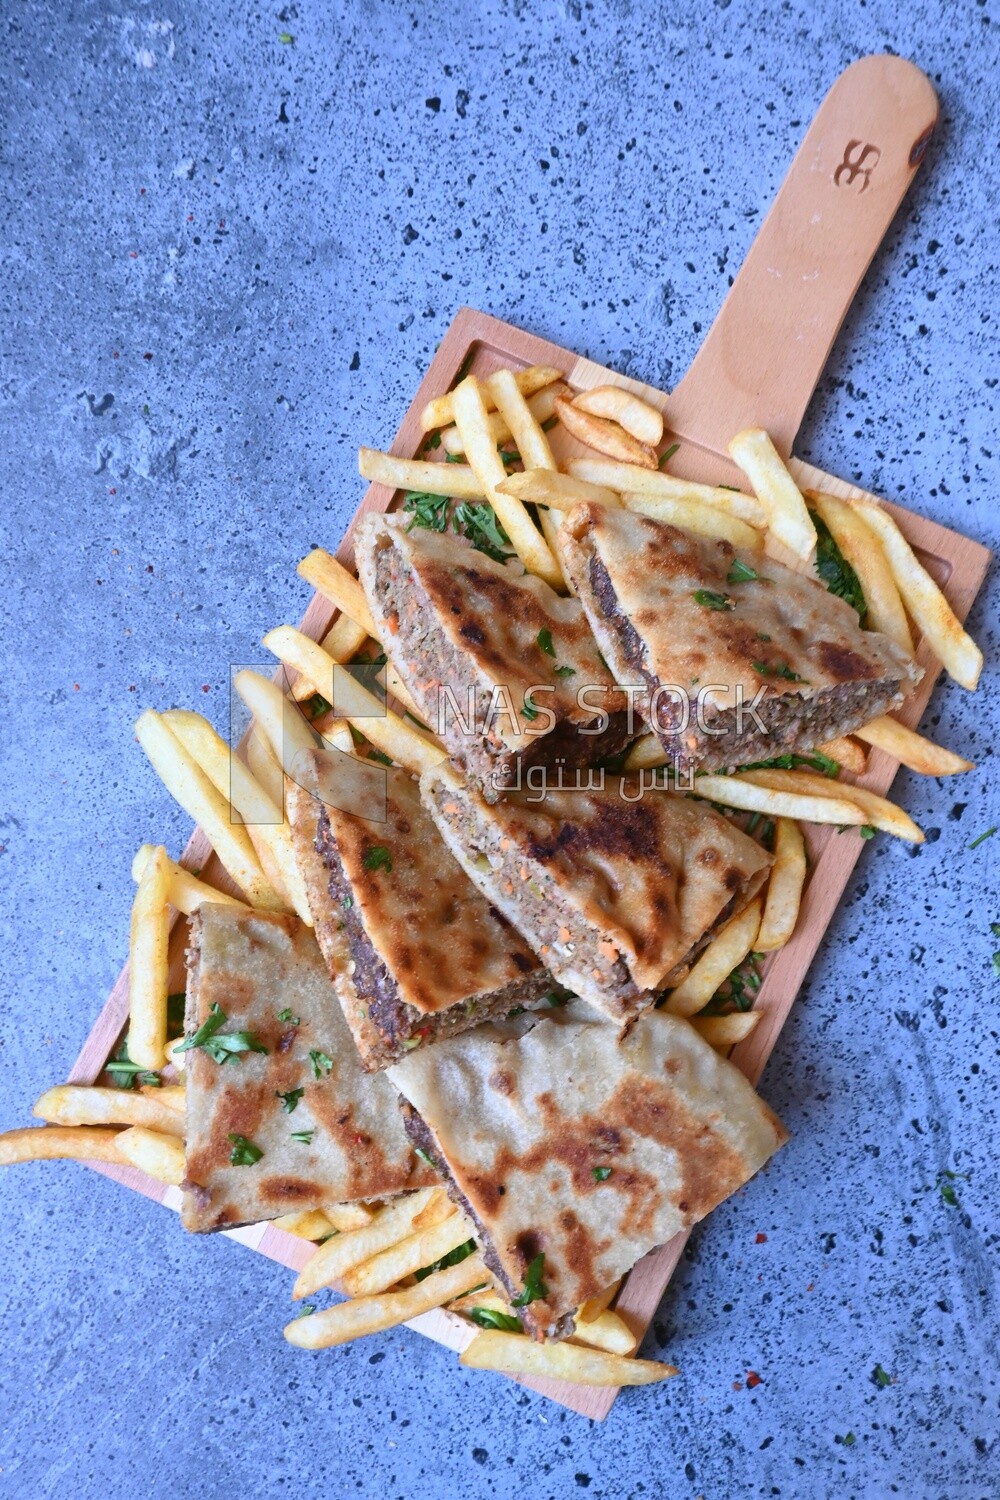 dish with hawawshi on it with fries